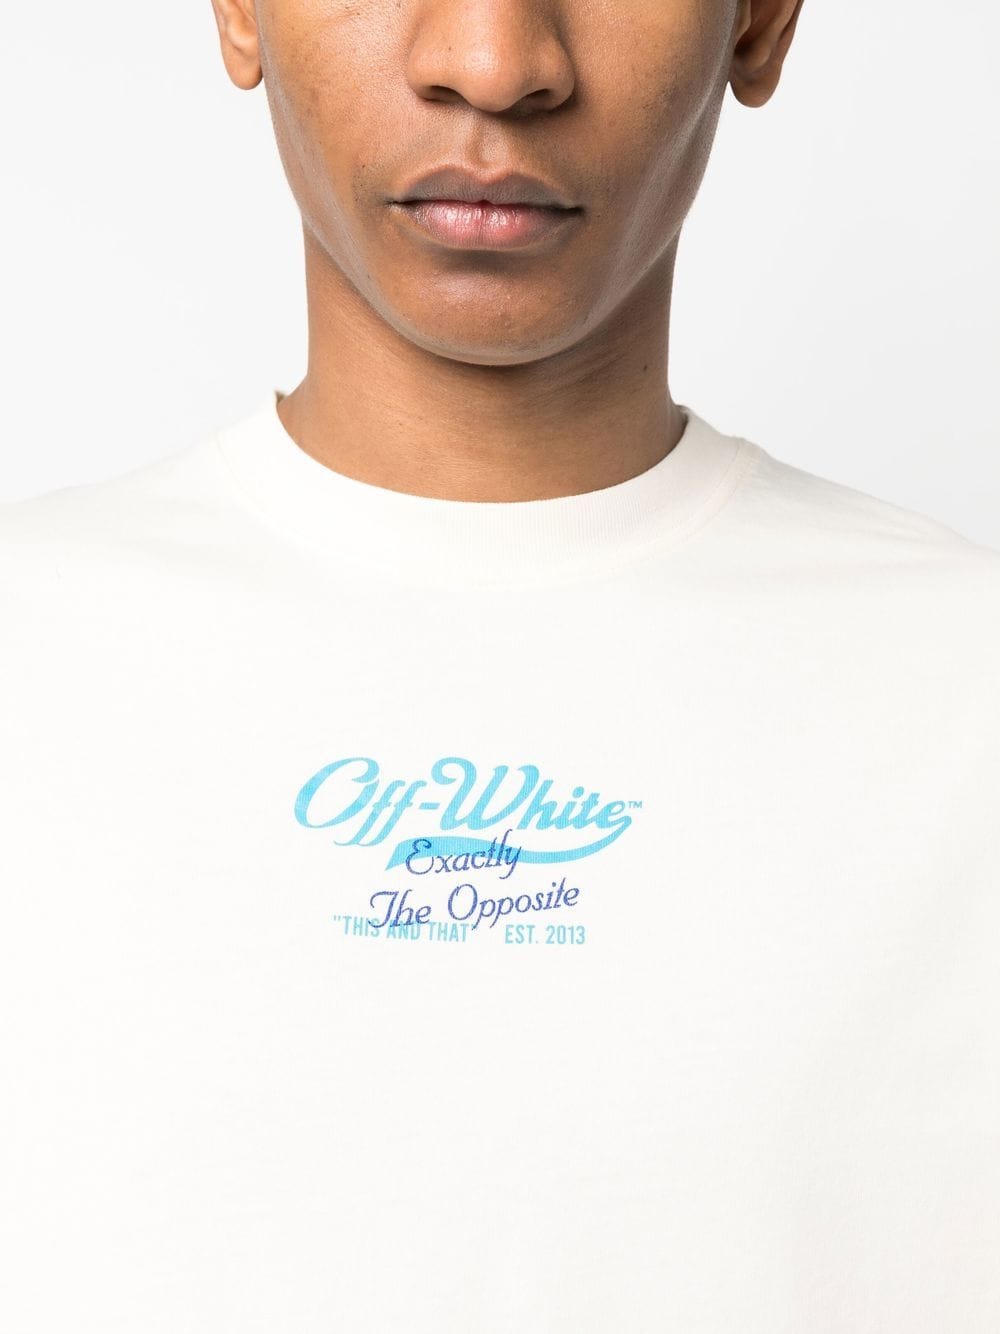 Off-white Abstract Logo Print T-shirt In Blue